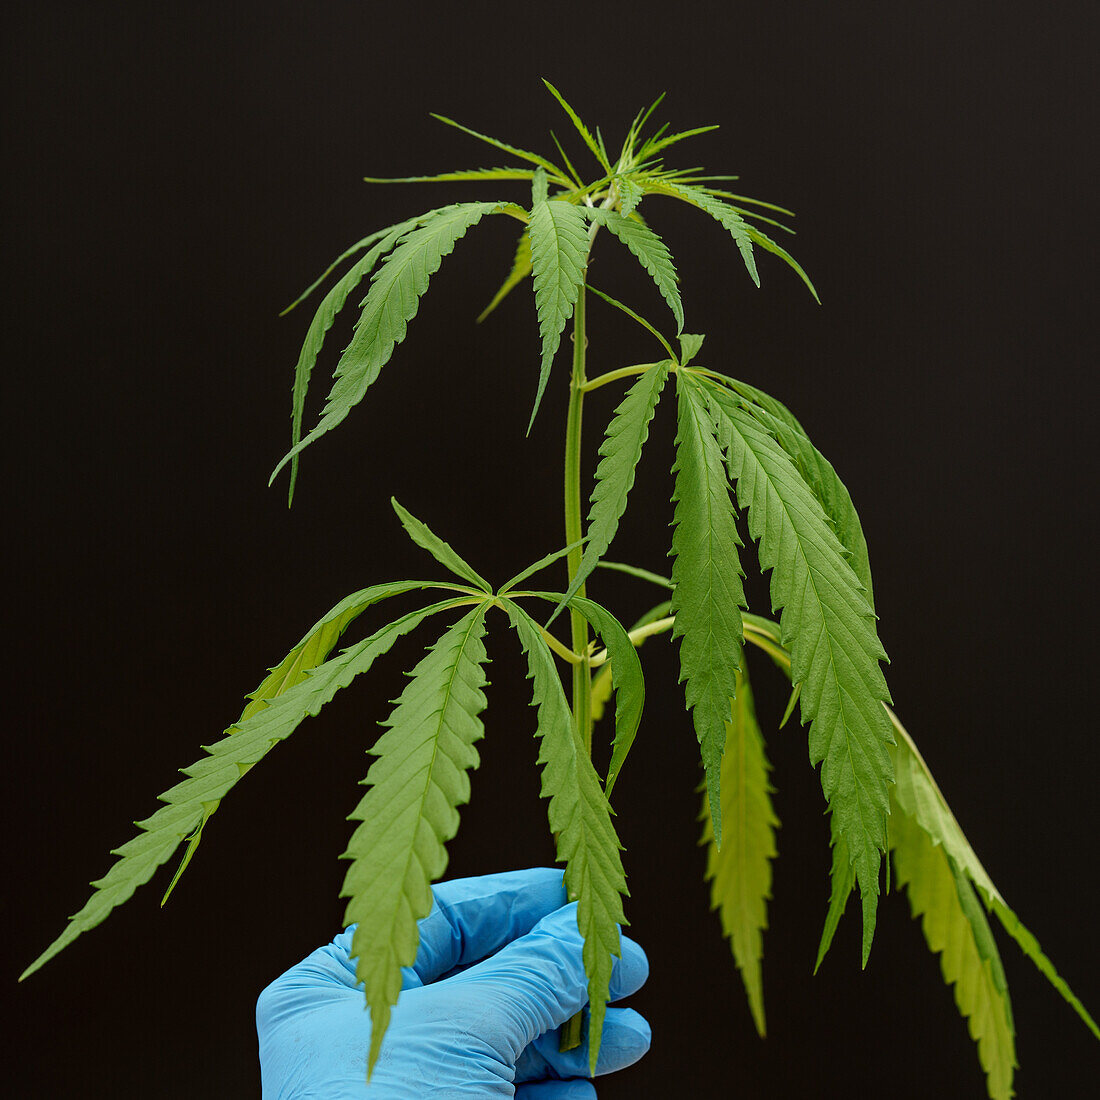 Laboratory assistant holding cannabis plant